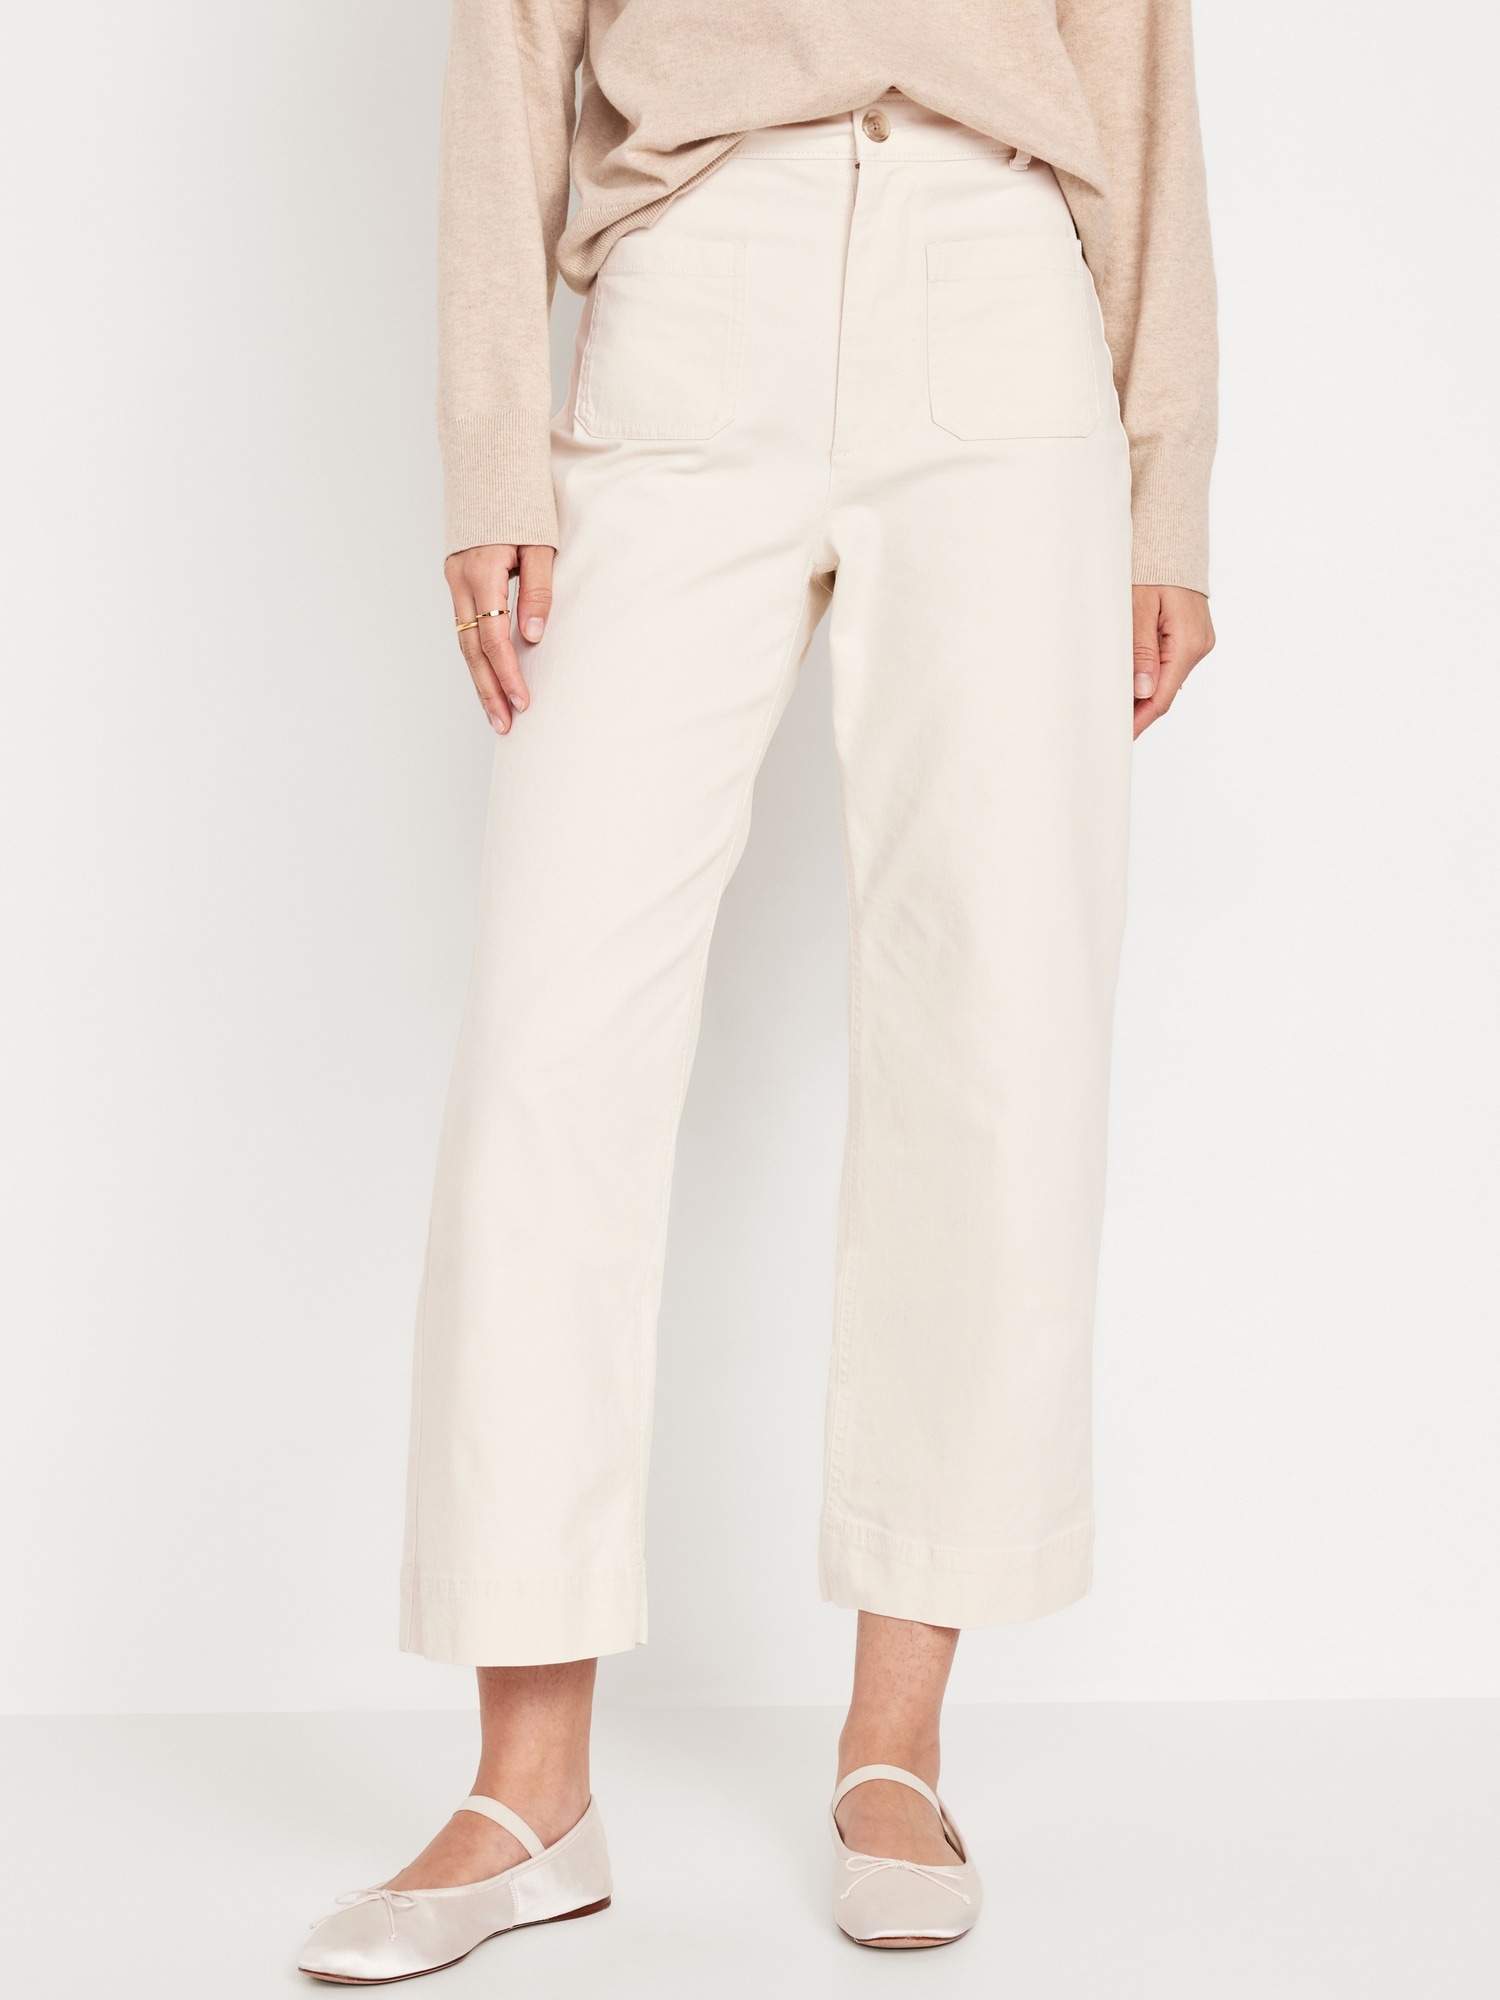 Boden Everyday Soft Cropped Trousers, Seaspray, 8